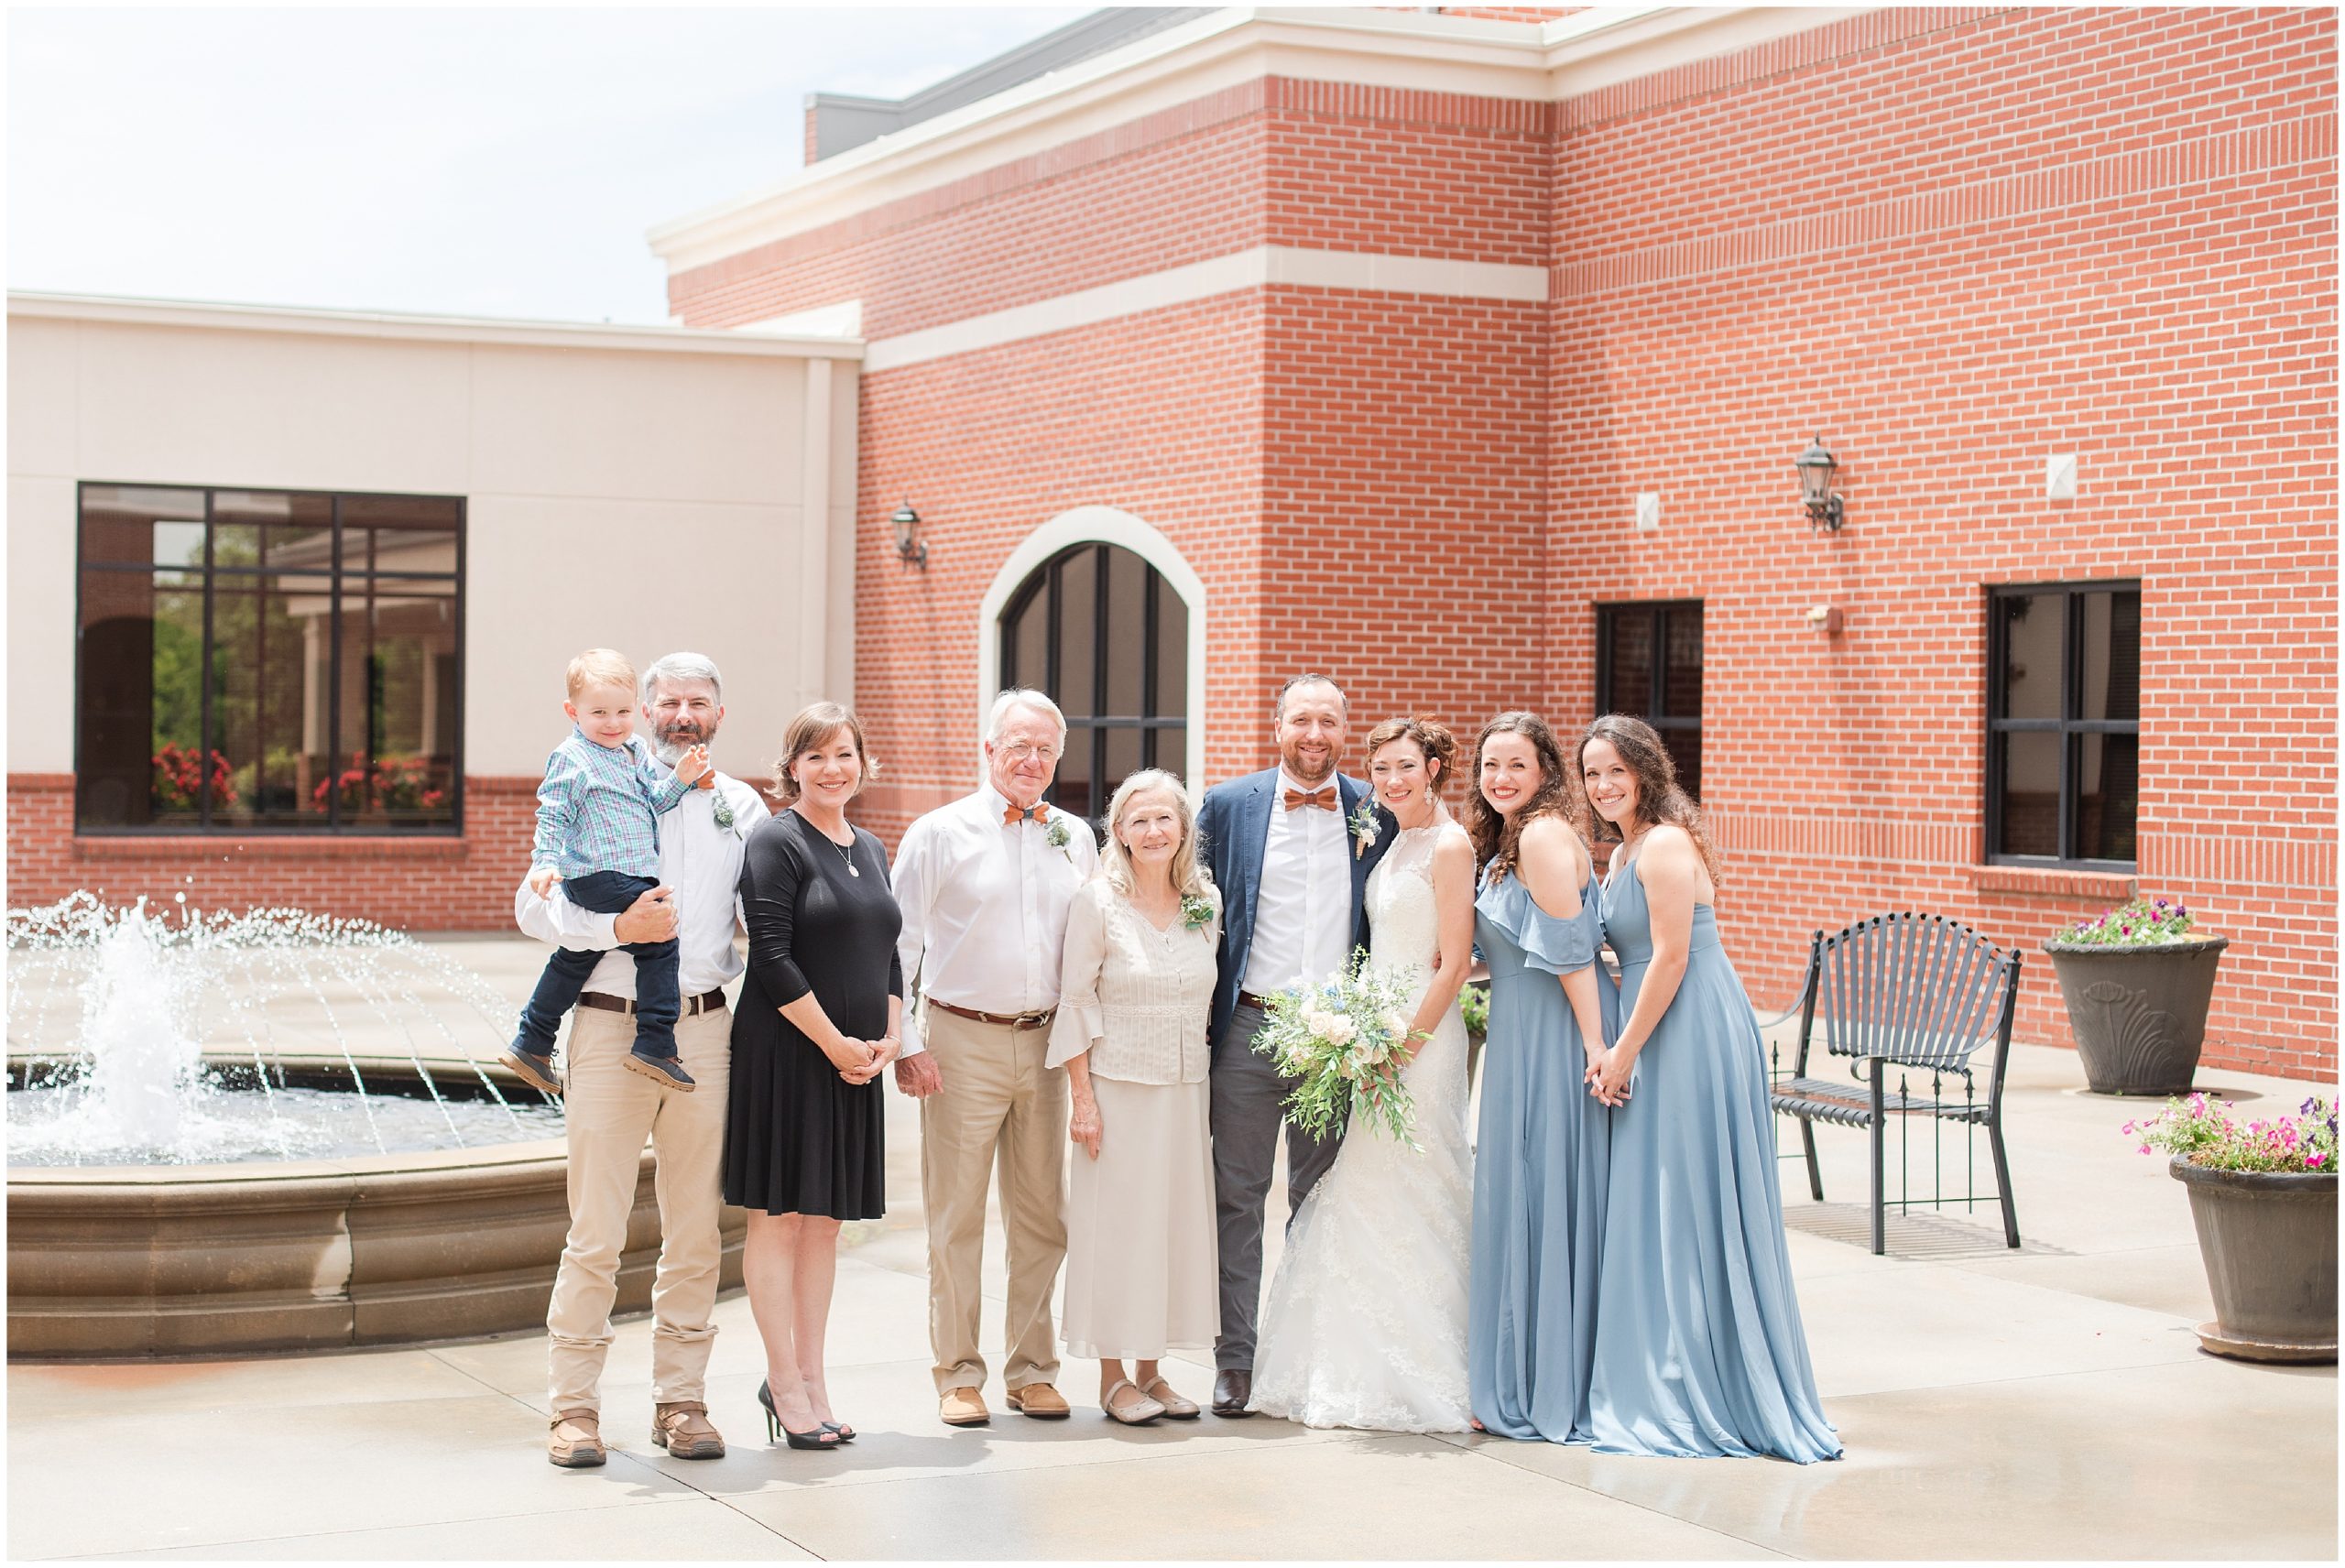 family portraits after Lawrenceville wedding for bride and groom